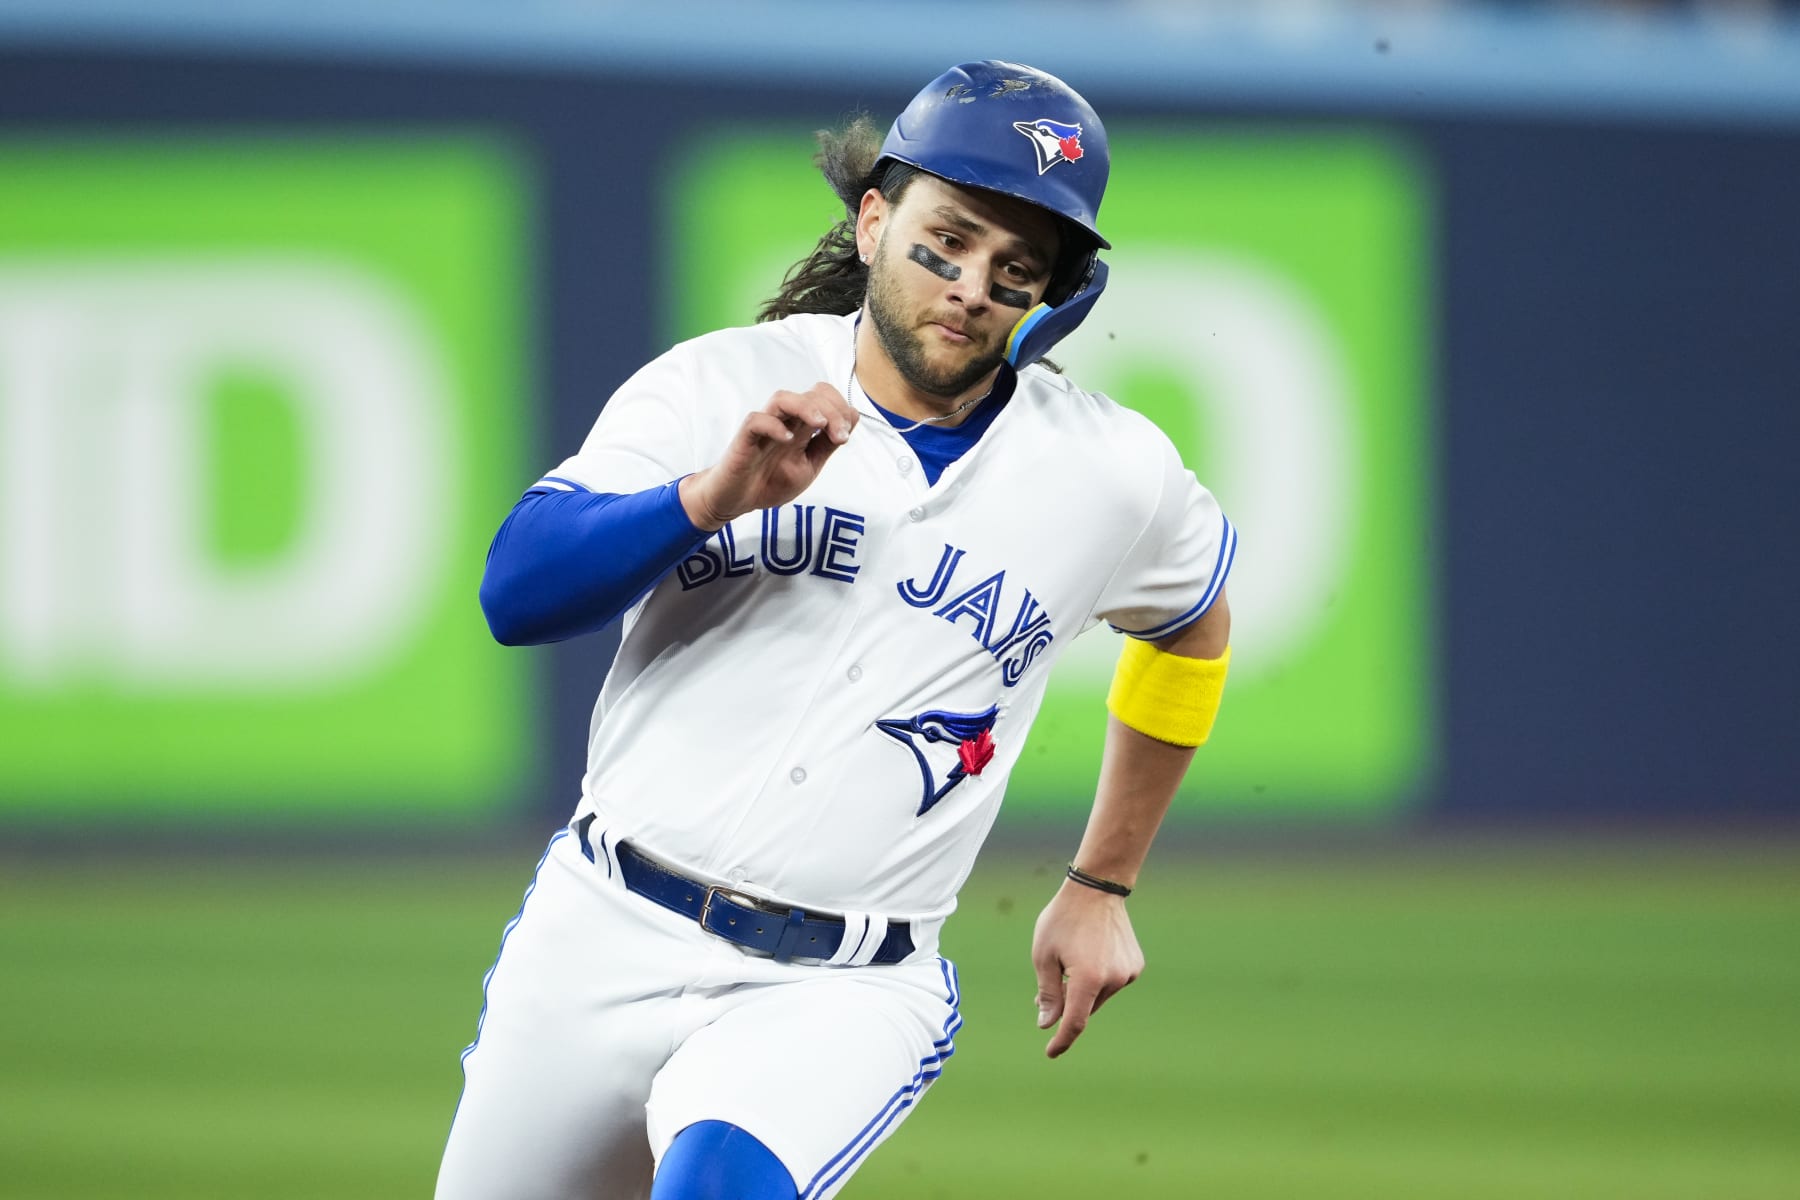 Gurriel's 5 RBIs best Ohtani's 2 HRs in Jays' win over Halos